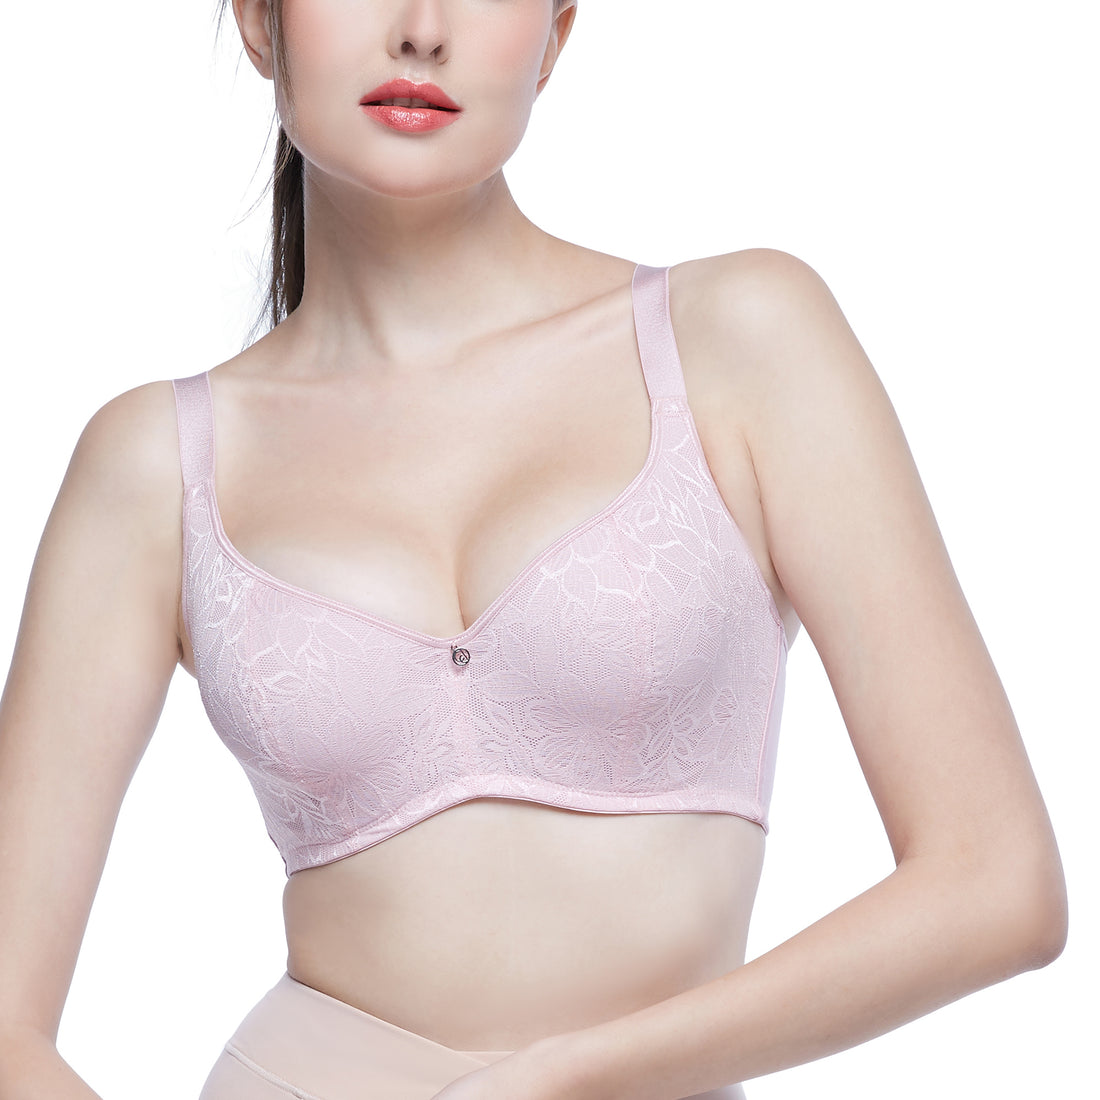 Wacoal Curve Diva Firming bra for big cup girls model WB7397/WQ1332 Pink Wild Rose (WR)